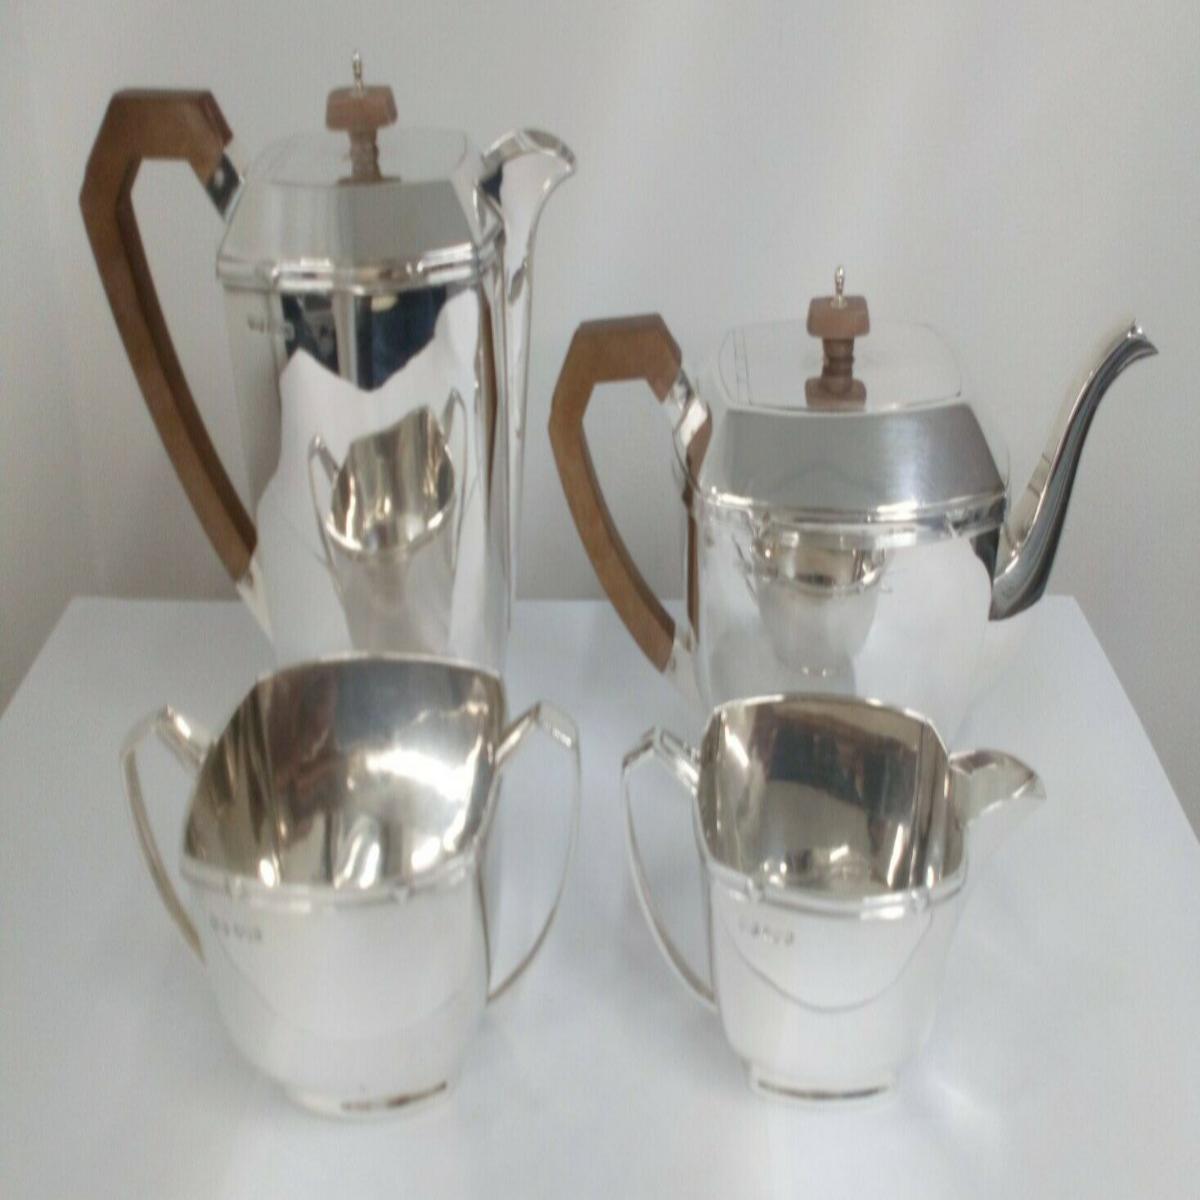 George V Art Deco Four-Piece Sterling Silver Tea Service

A fine vintage George V English sterling silver four-piece tea and coffee service in the Art Deco style.This exceptional tea set consists of a coffee/water jug, teapot, cream jug and sugar